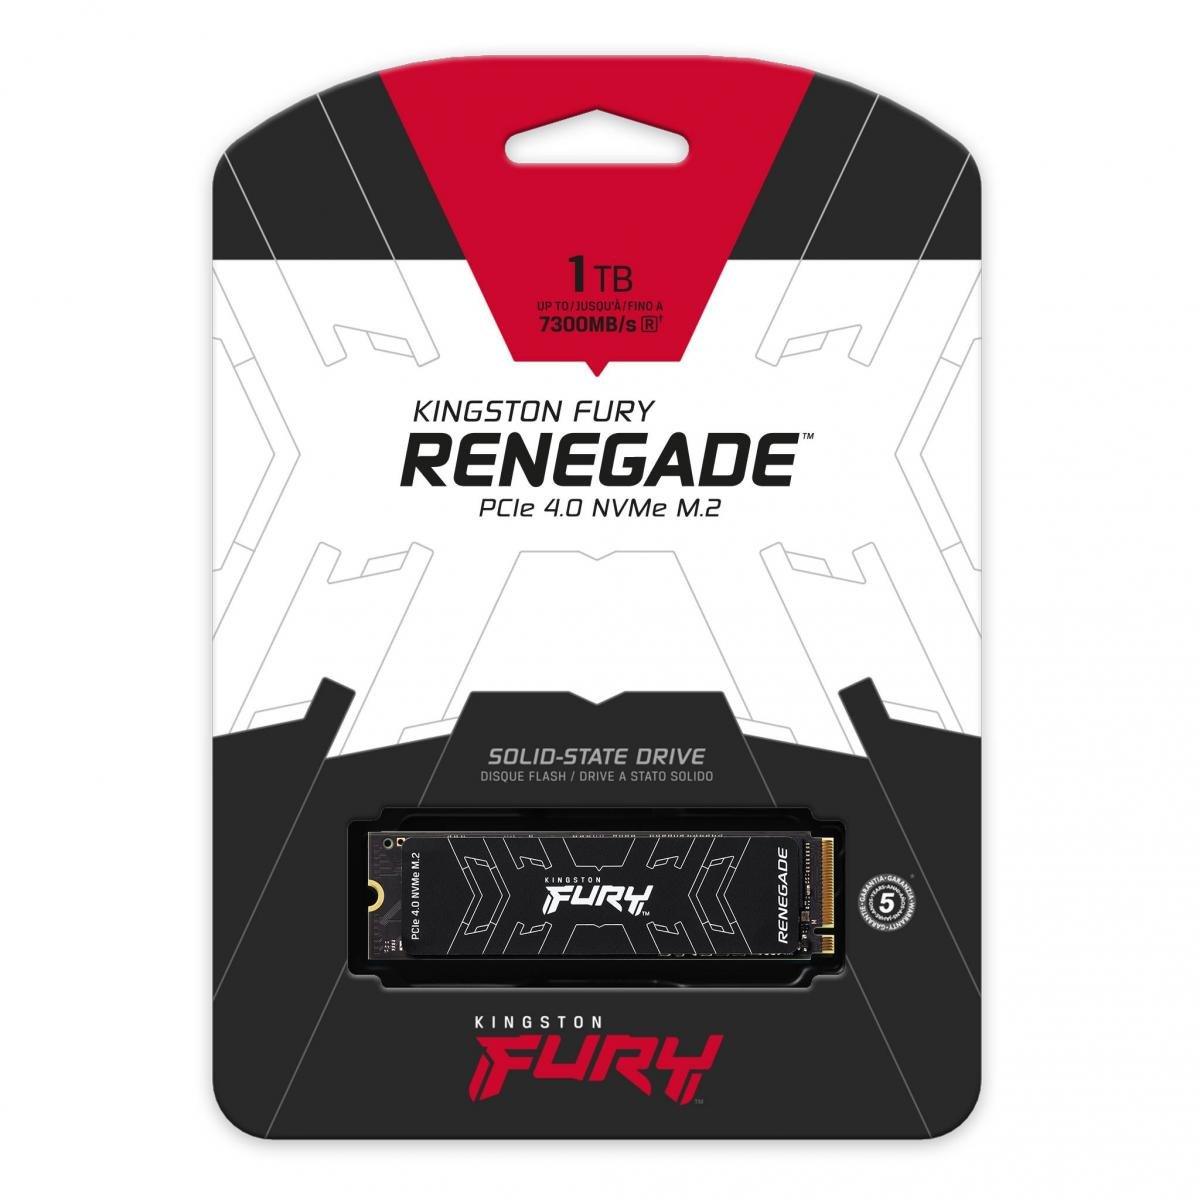 KINGSTON Solid State Drive Kingston FURY Renegade 1TB PCIe4.0 NVMe M.2 SSD-Sequential Read/Write (7300/6000 MB/s)